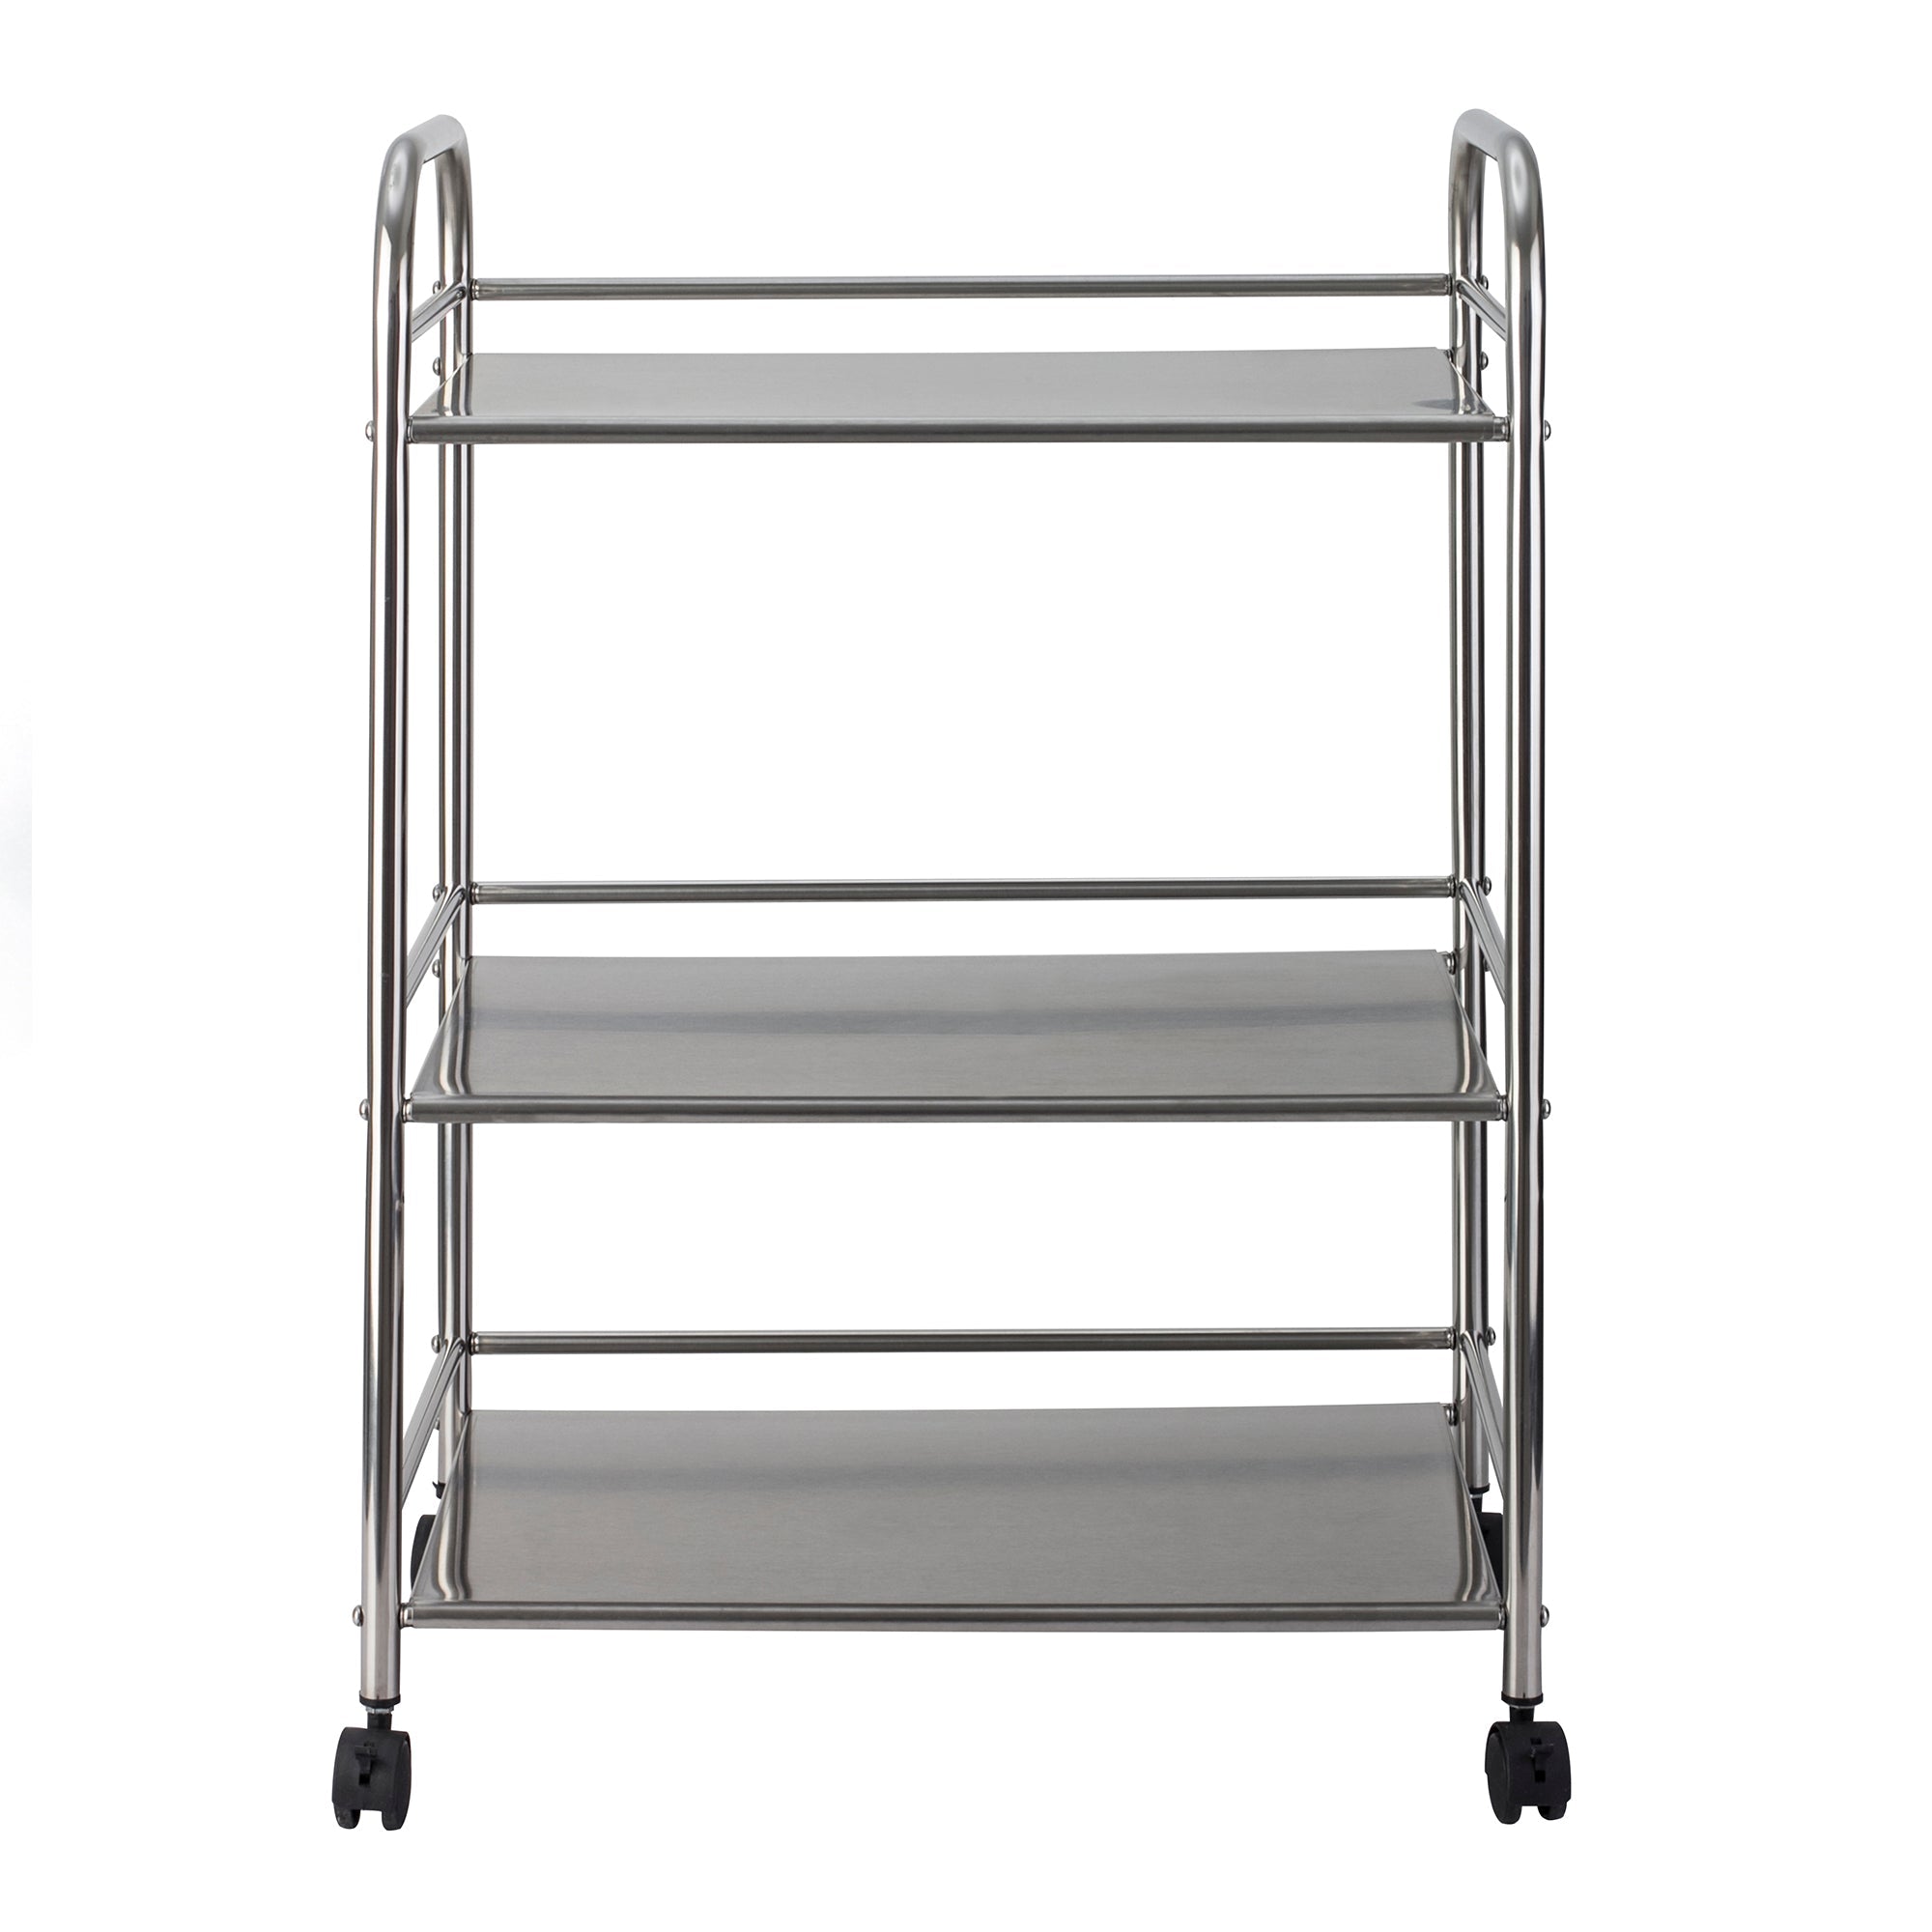  Free standing rack on wheels, Seismic Readiness, Preparedness, Earthquake, Height Adjustable Fork Anchors for Legs, putty, stp-203-15b-py 